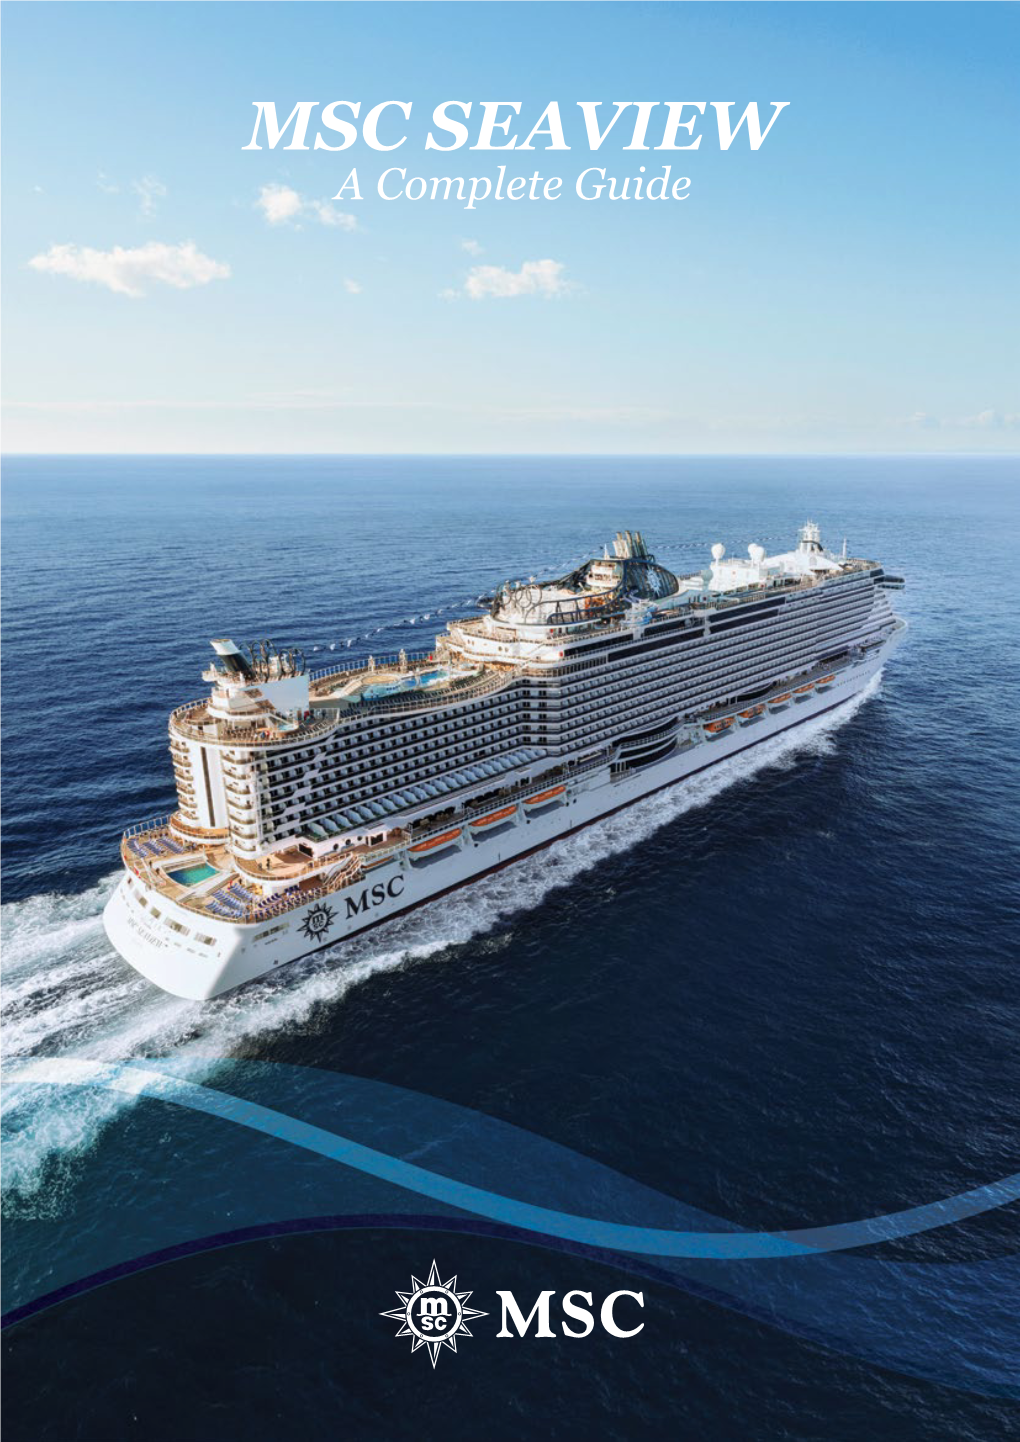 MSC SEAVIEW a Complete Guide CONTENT